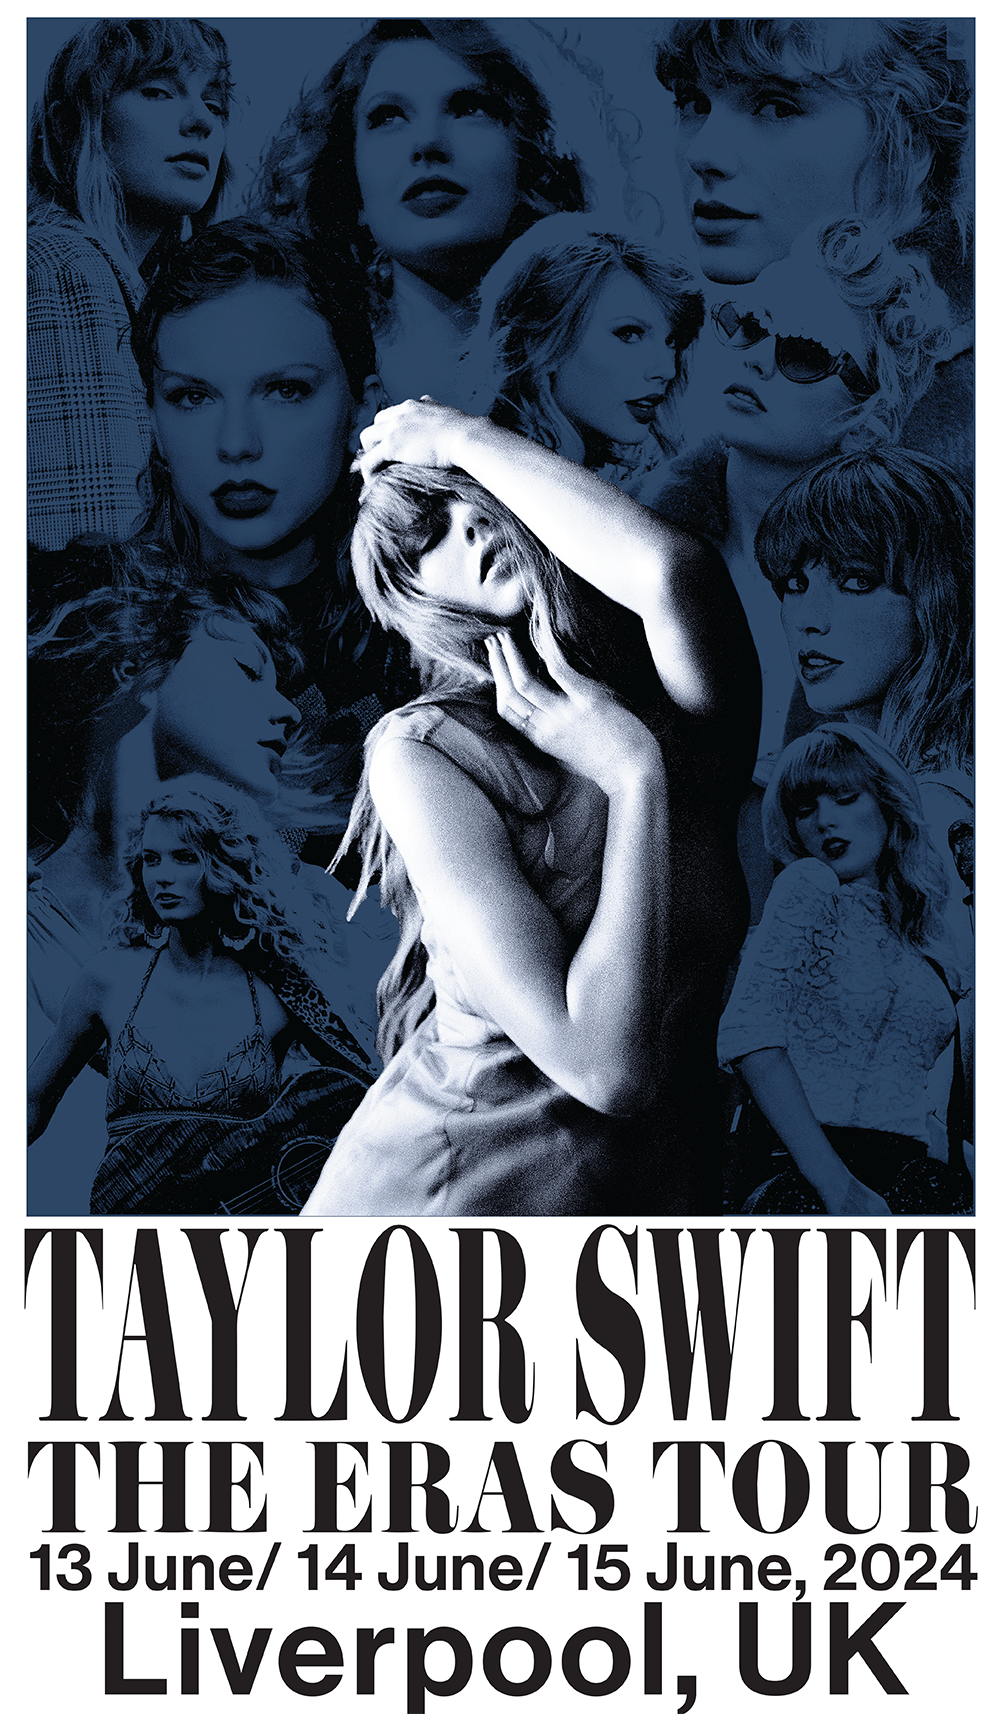 Taylor Swift - Taylor Swift The Eras Tour Liverpool, UK Poster